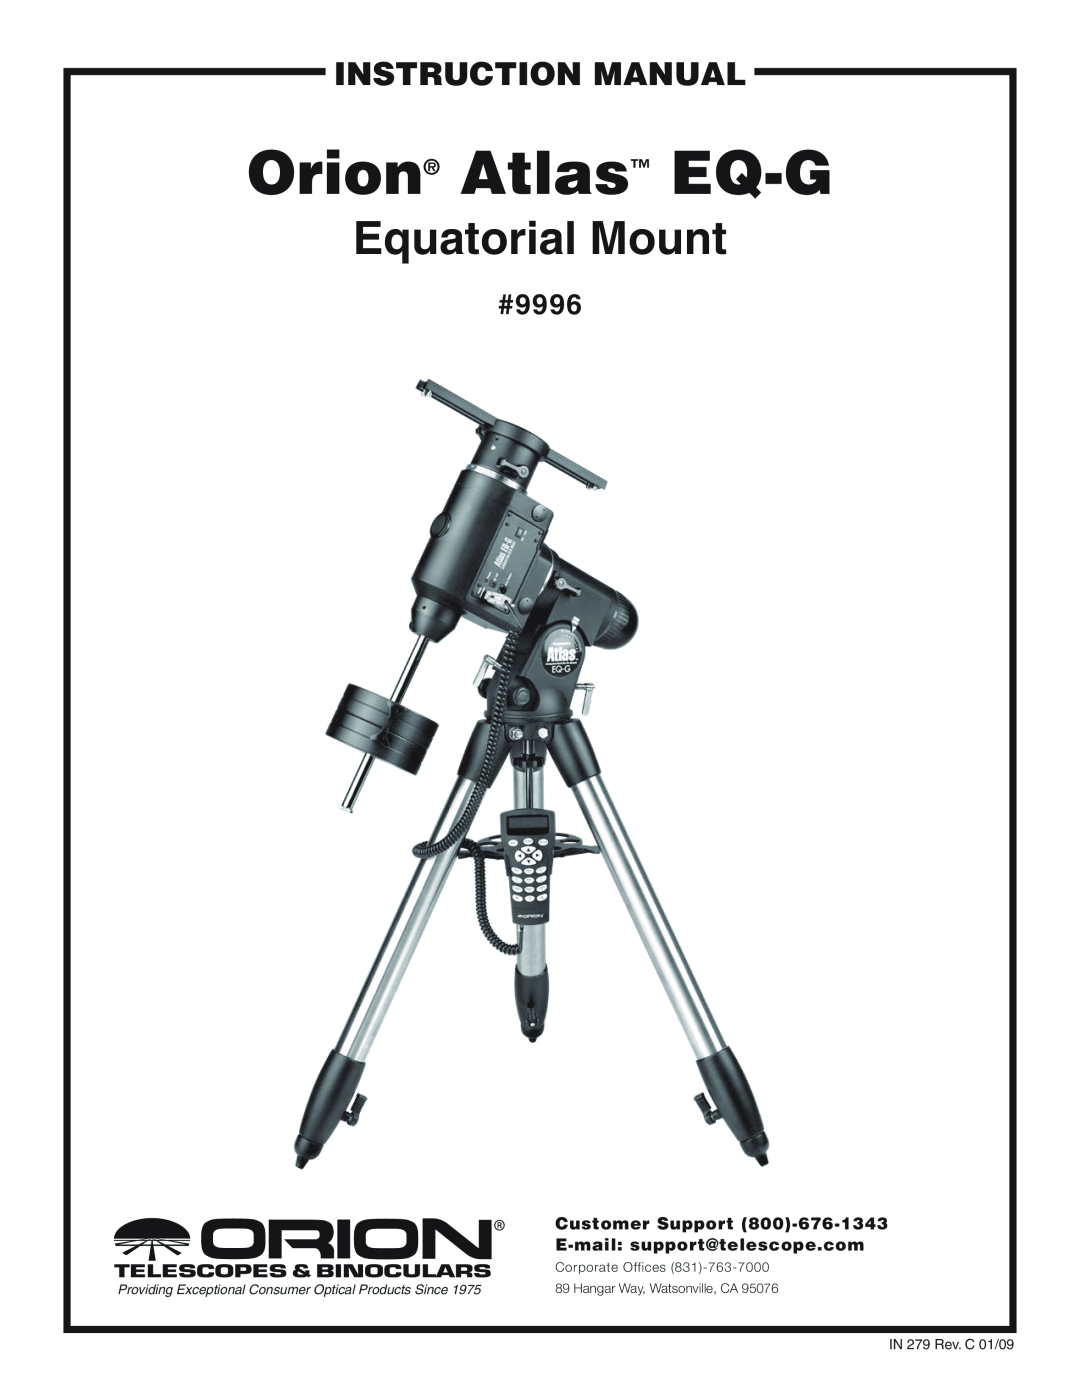 Orion instruction manual #9996, Customer Support 800‑676-1343, E-mail support@telescope.com, Orion Atlas EQ-G 